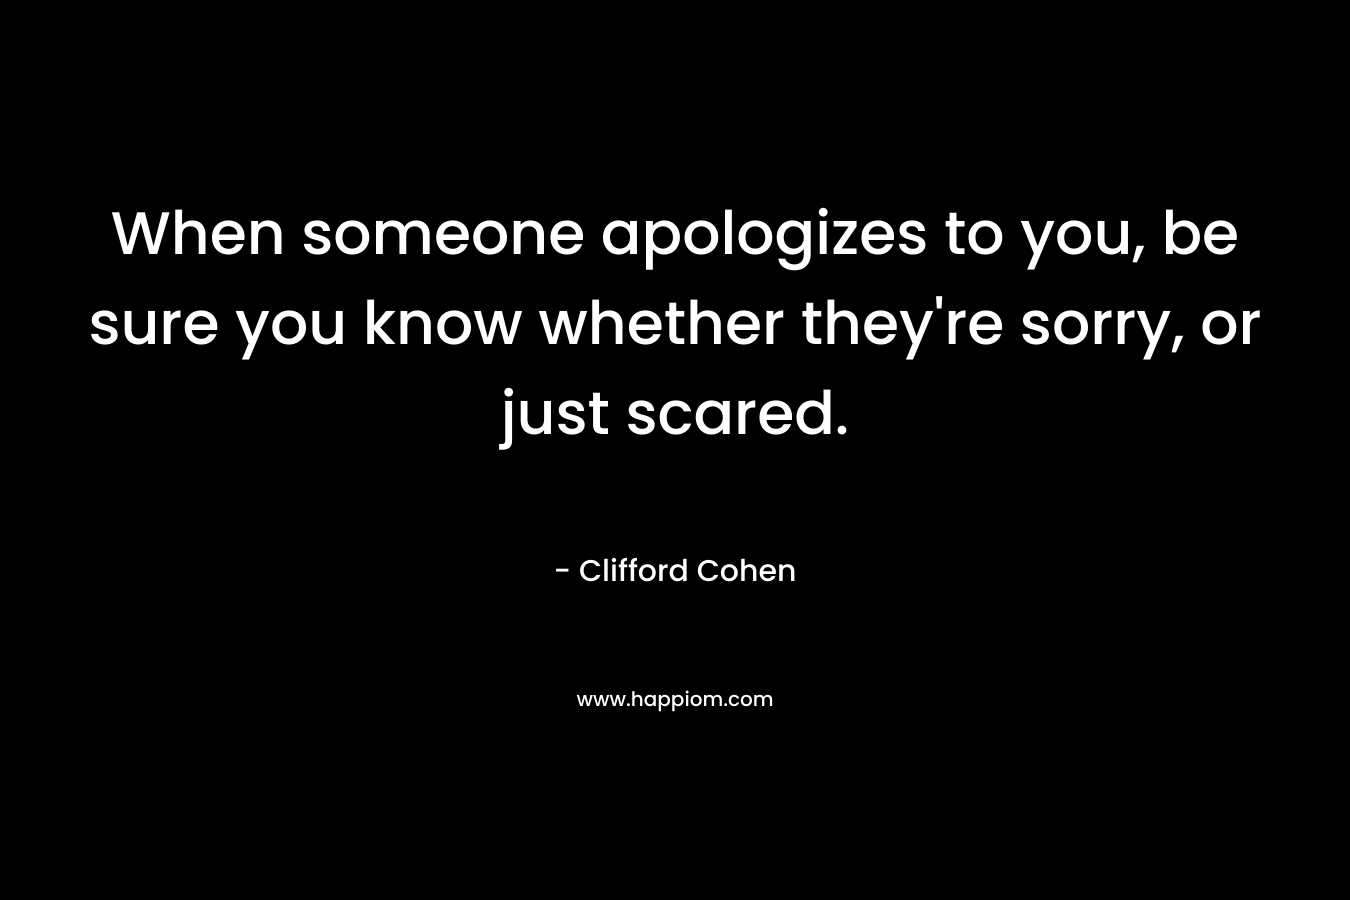 When someone apologizes to you, be sure you know whether they're sorry, or just scared.